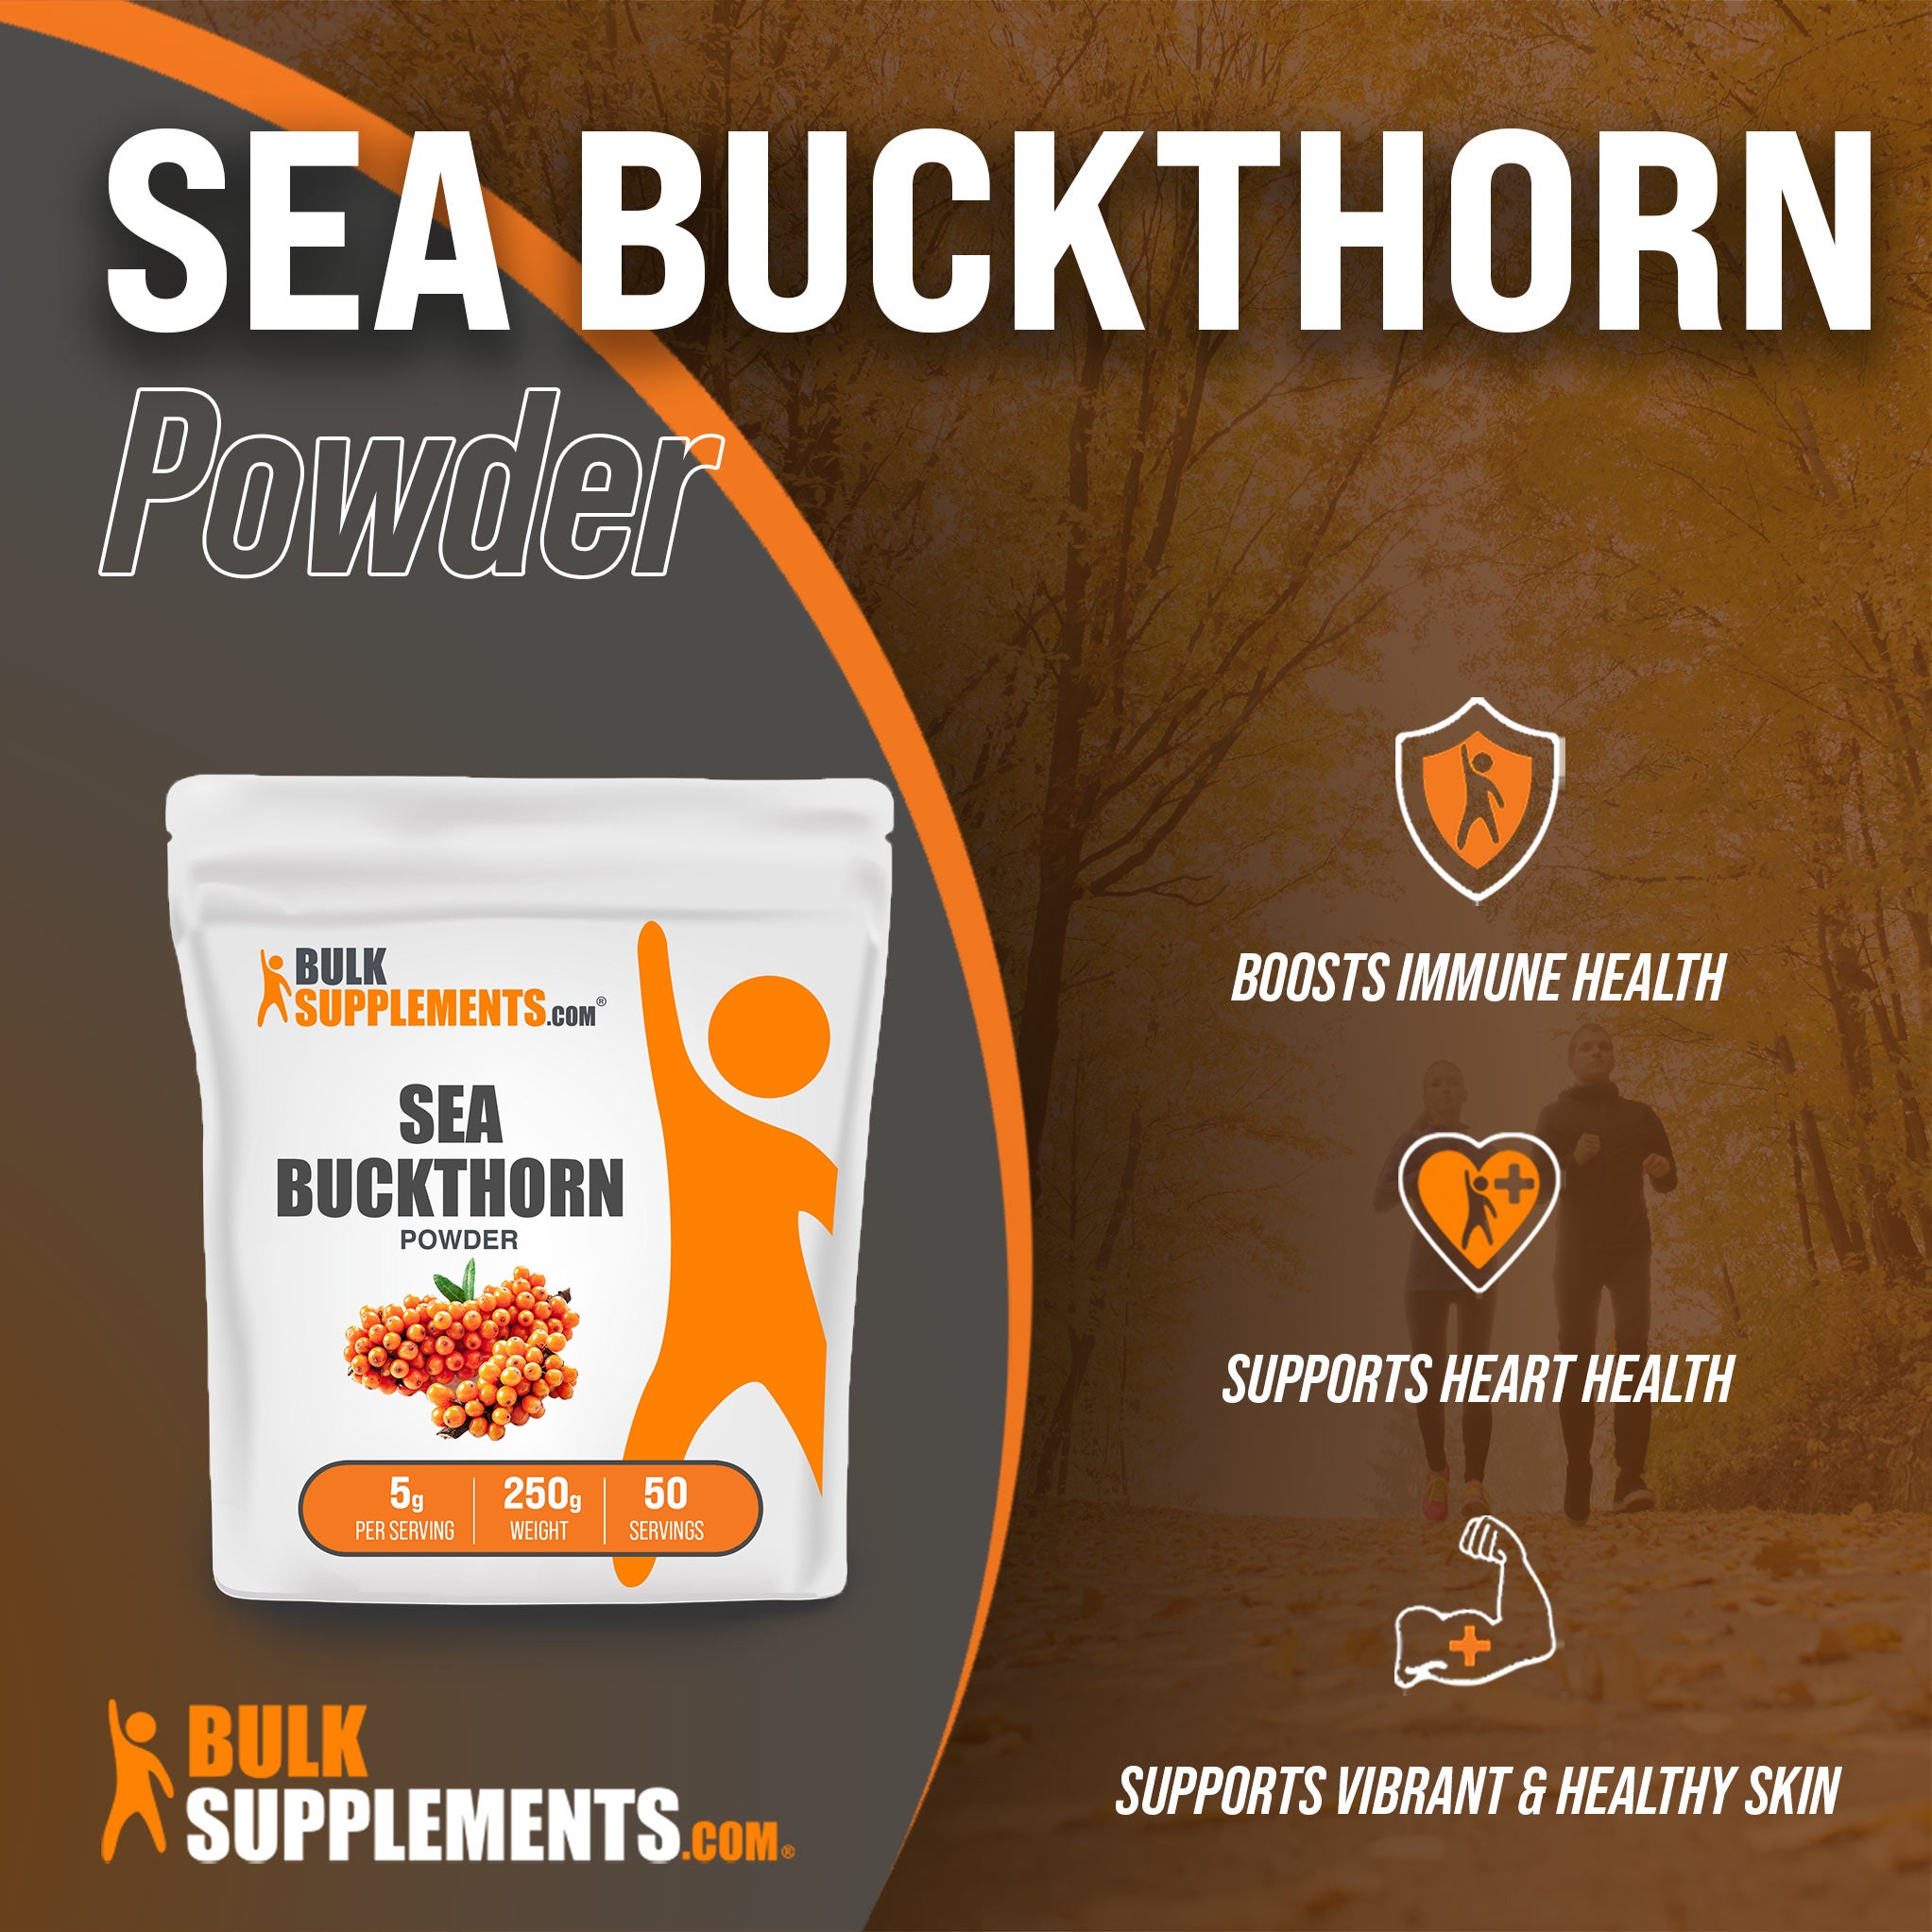 Benefits of Sea Buckthorn Powder: boosts immune health, supports heart health, supports vibrant and healthy skin